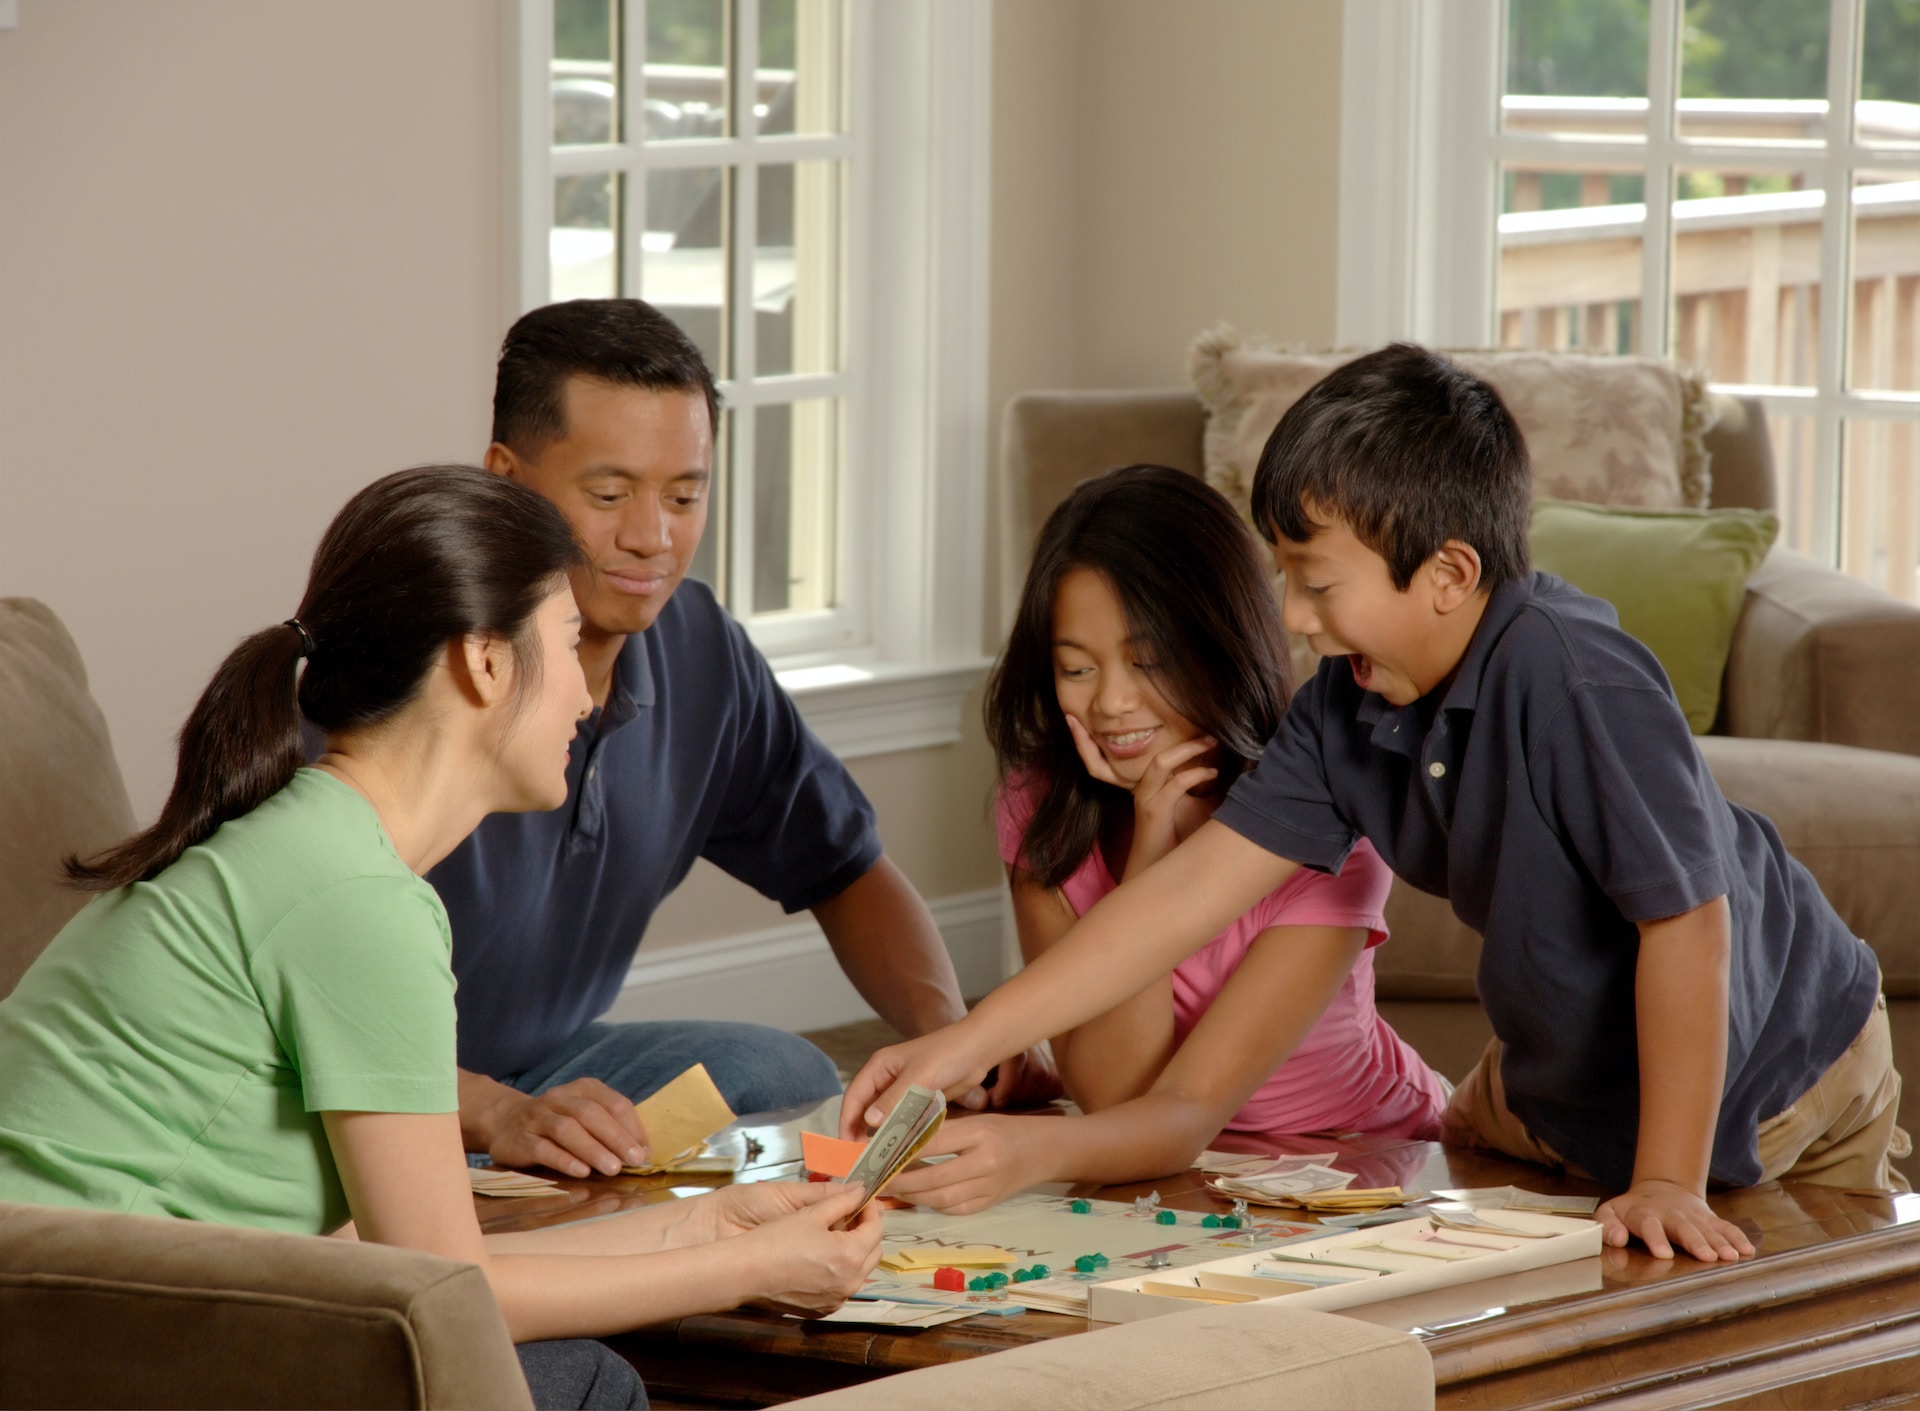 Two adults and two adolescents sitting around a coffee table playing Monopoly.